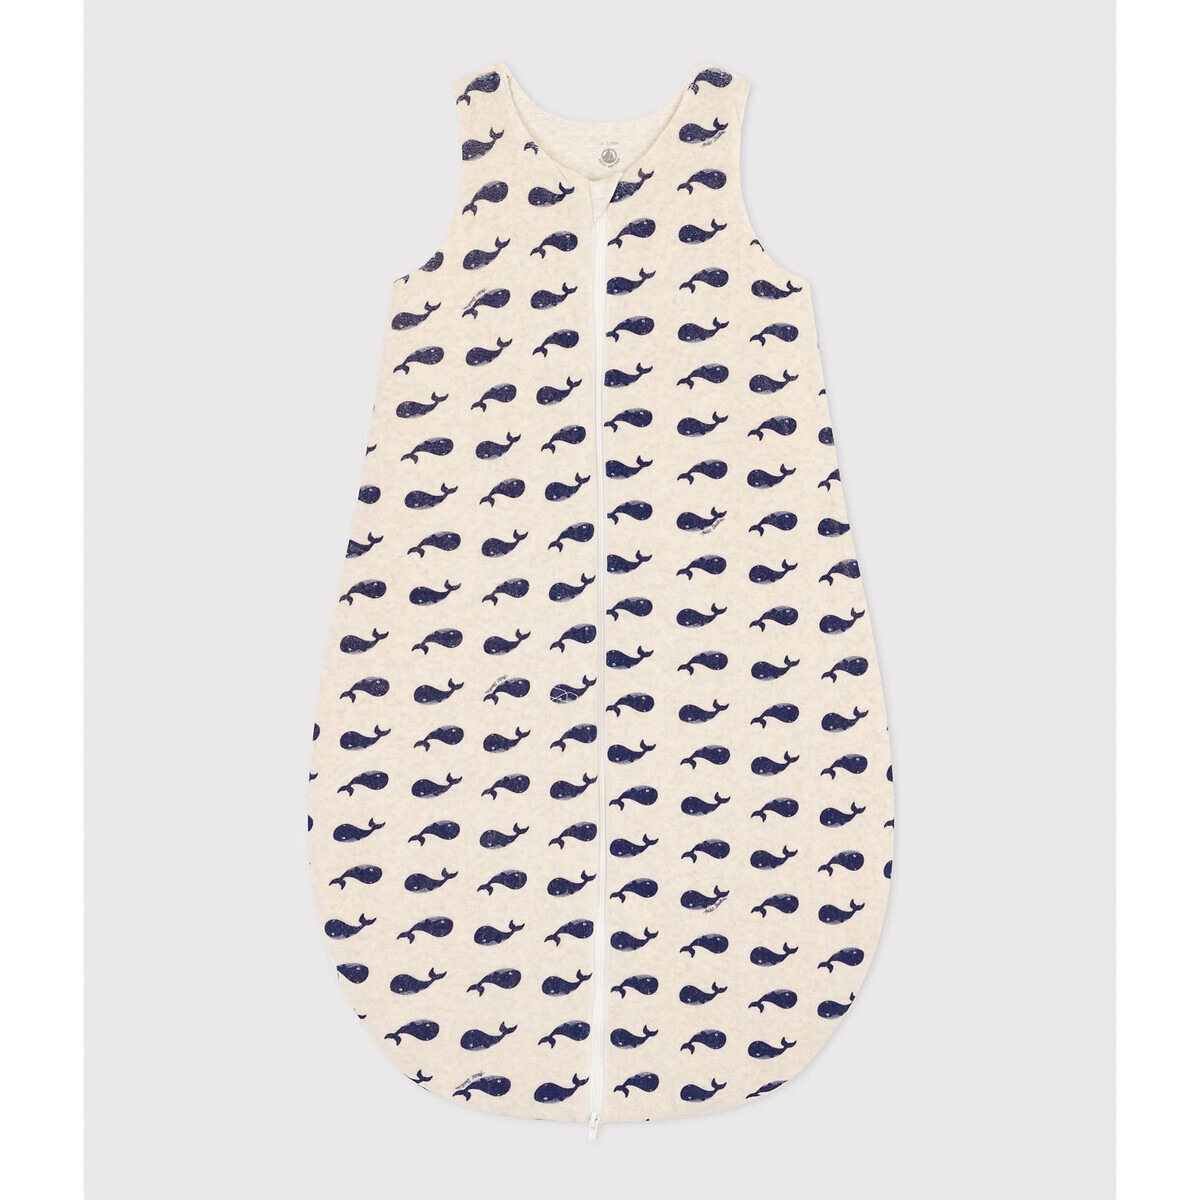 Cotton Sleeping Bag in Whale Print - image 1